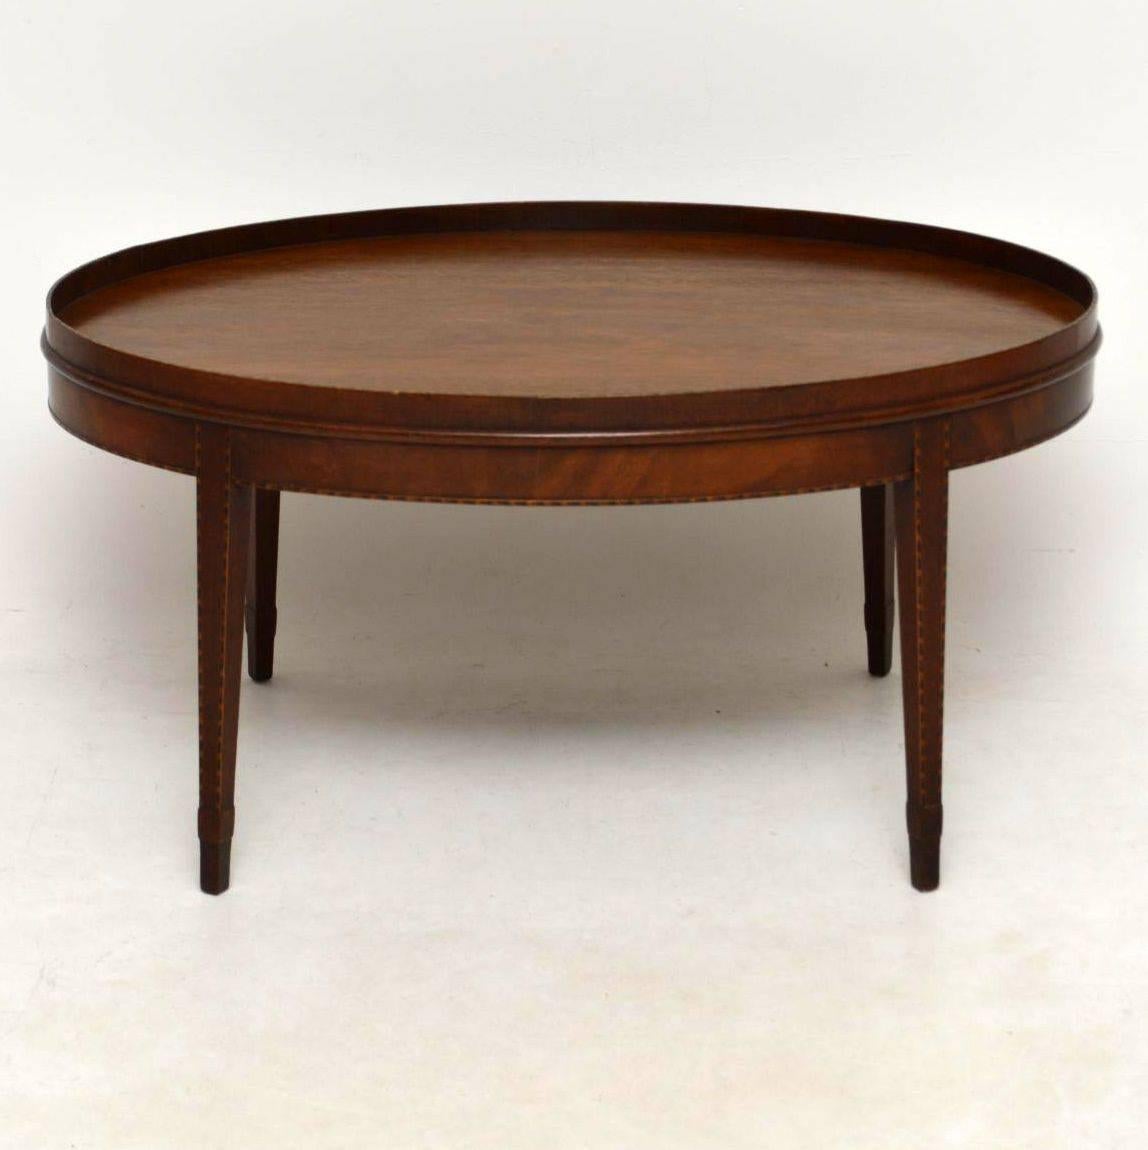 Very elegant antique mahogany oval top coffee table in good condition & dating from around the 1910-20’s period. It has a gallery around the top edge & the side border is flame mahogany. The tapered legs are angled outwards & have an added section